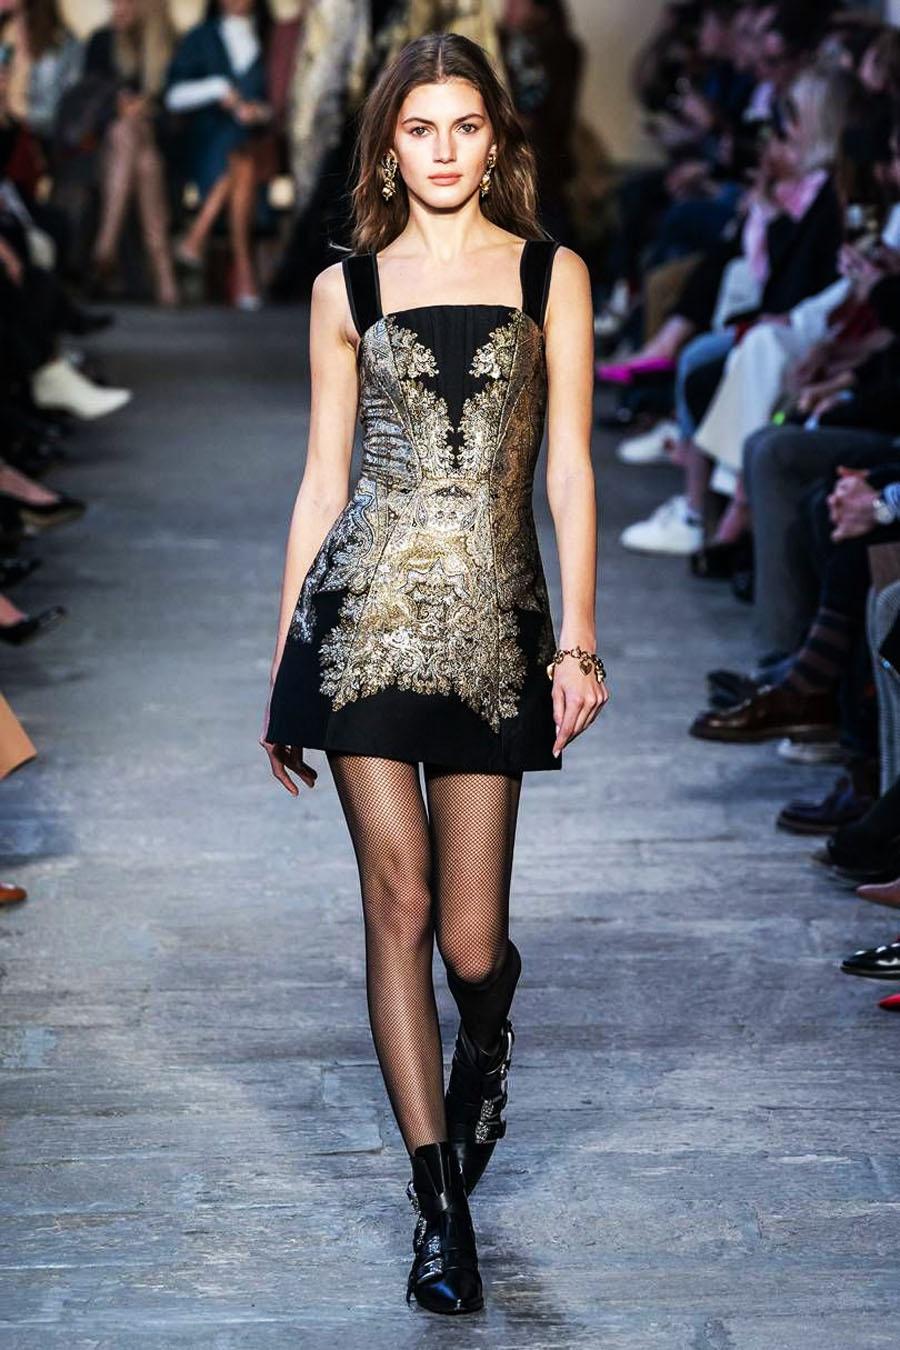 Etro Brocade Rich Gold Black Corset Mini Dress
F/W 2019 Runway Collection
Italian size - 42
Black Gold Metallic Paisley and French Delicate Lace Print Brocade Fabric, Internal Boning, 
Lace-Up Back, Velvet Shoulder Straps, Fully Lined, Side Zip